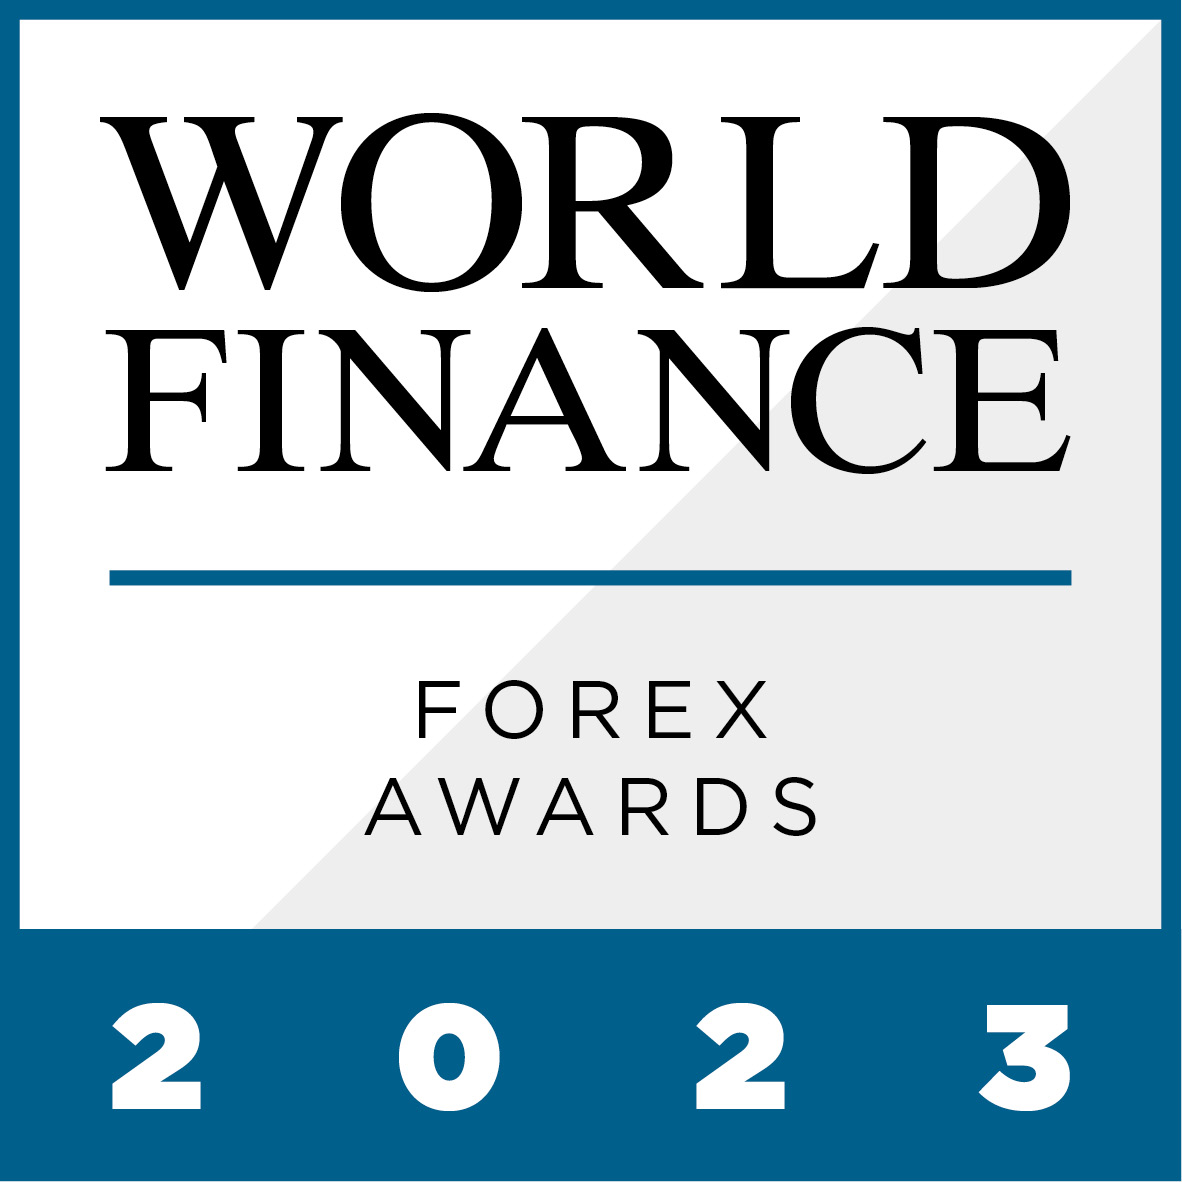 With global economic uncertainty persisting in 2023, it has been a challenging year in the Forex industry. World Finance presents its awards for those who have led the way during a year characterised by volatility rather than trend